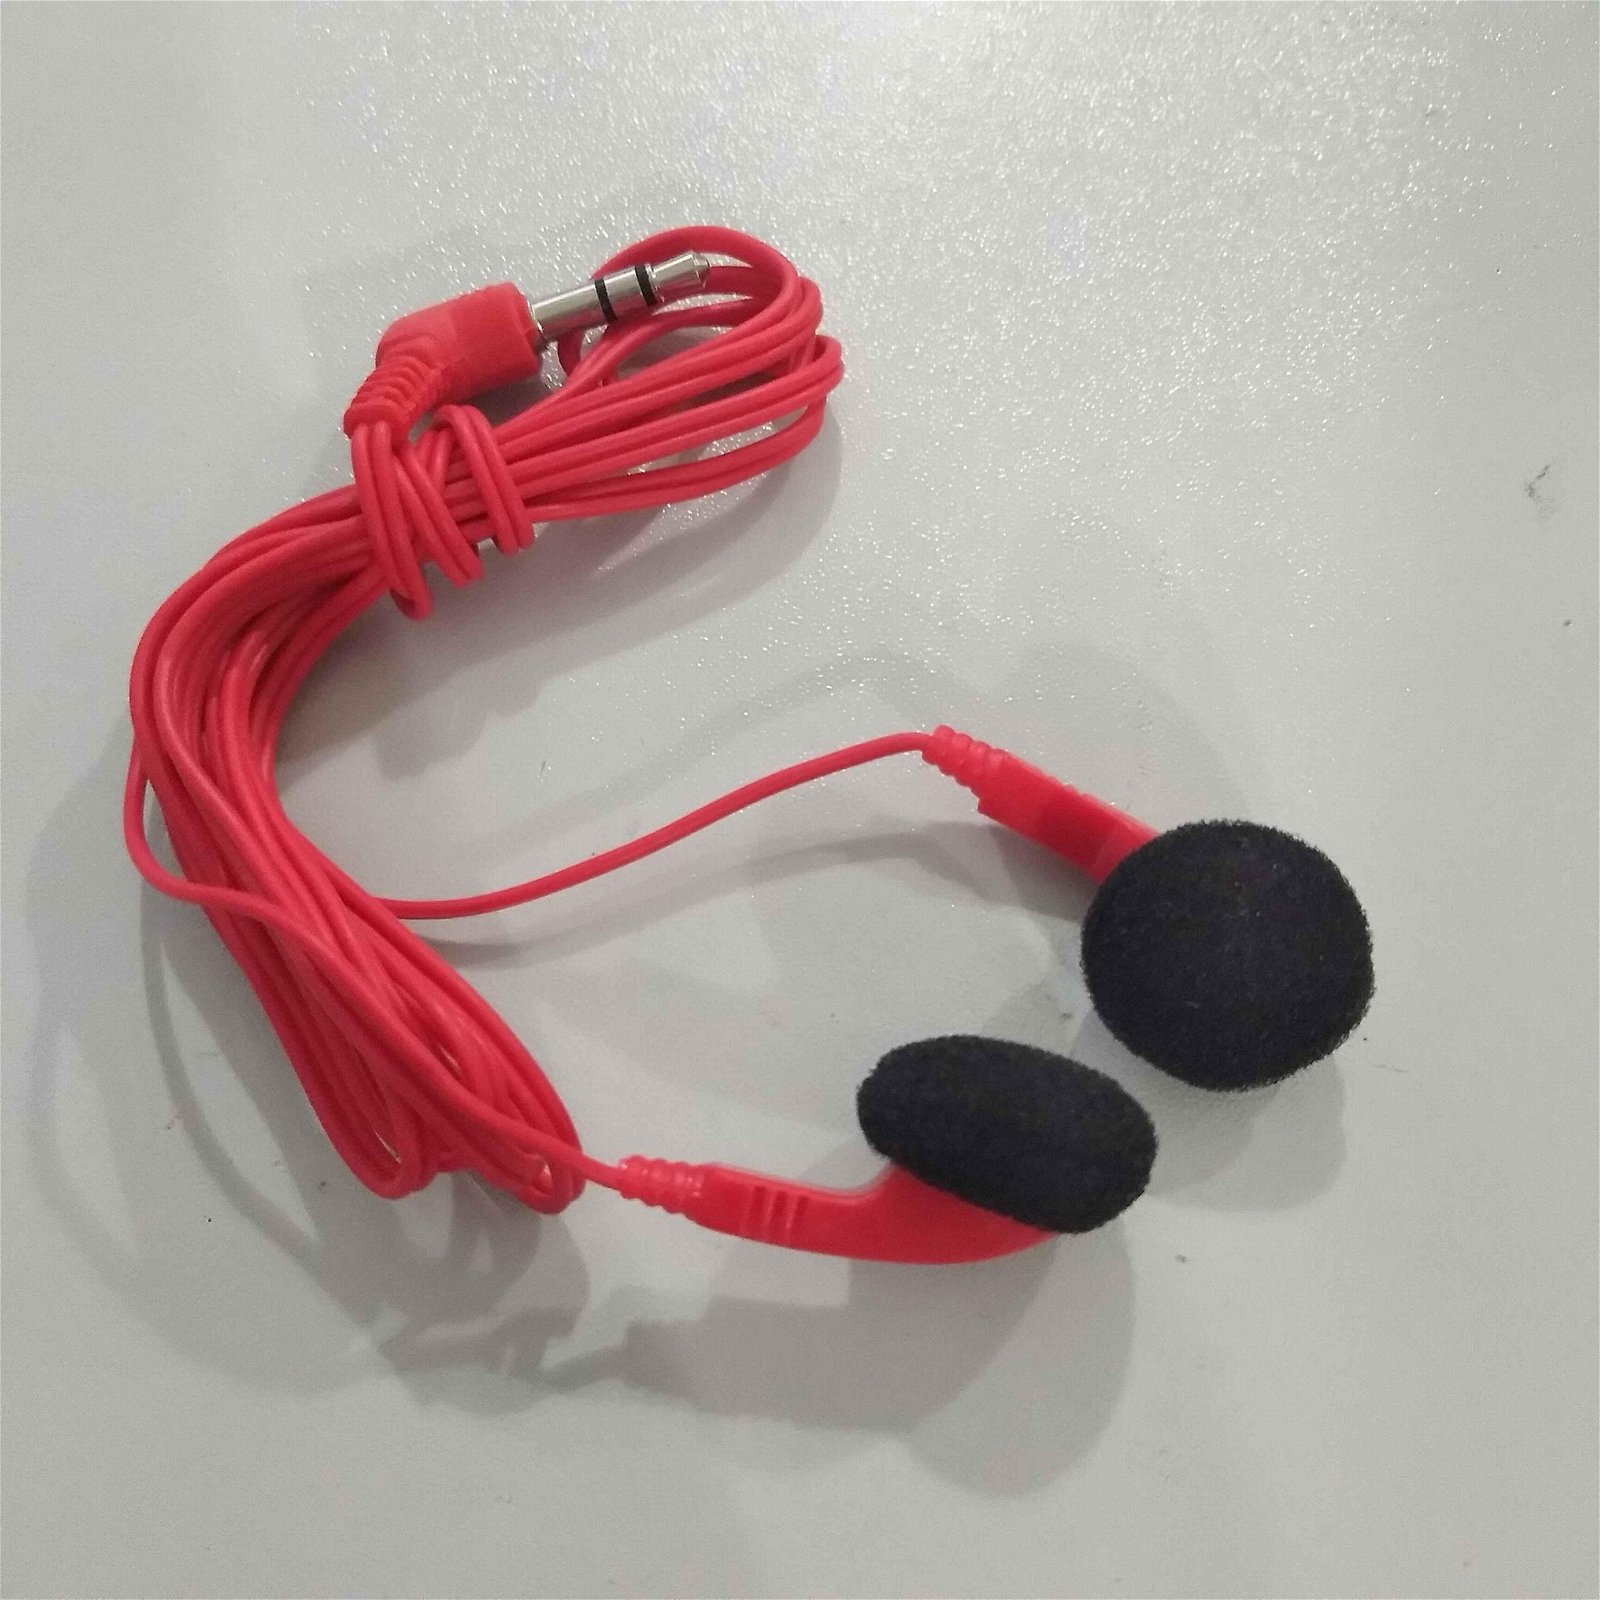 2018 new products earphone 3.5mm cheap disposable airline /bus earphone cover 3